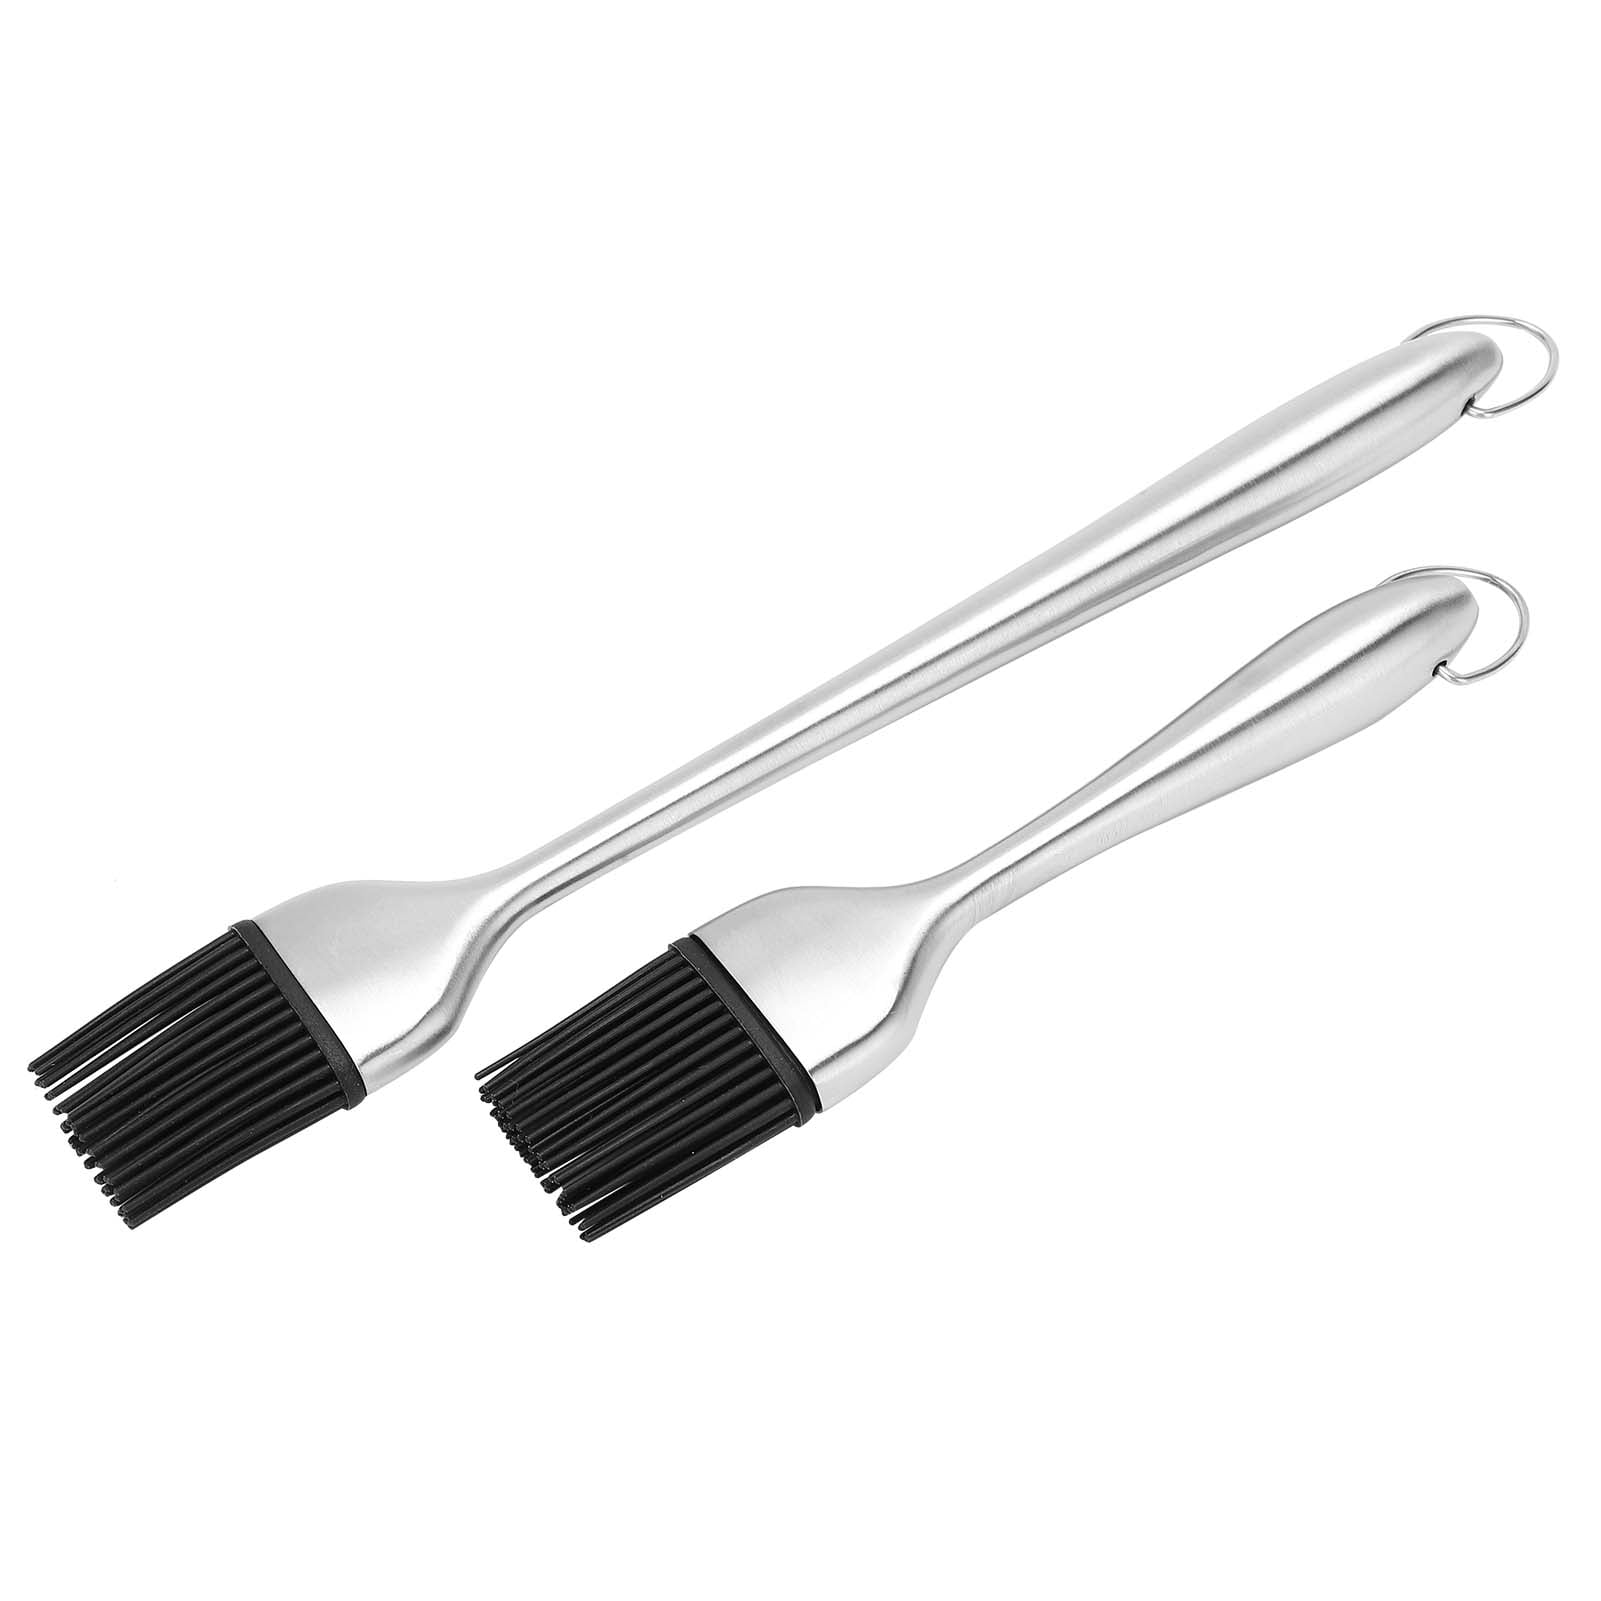 64010 BROIL KING HIGH QUALITY STAINLESS STEEL BBQ SUPER FLIPPER SPATULA 